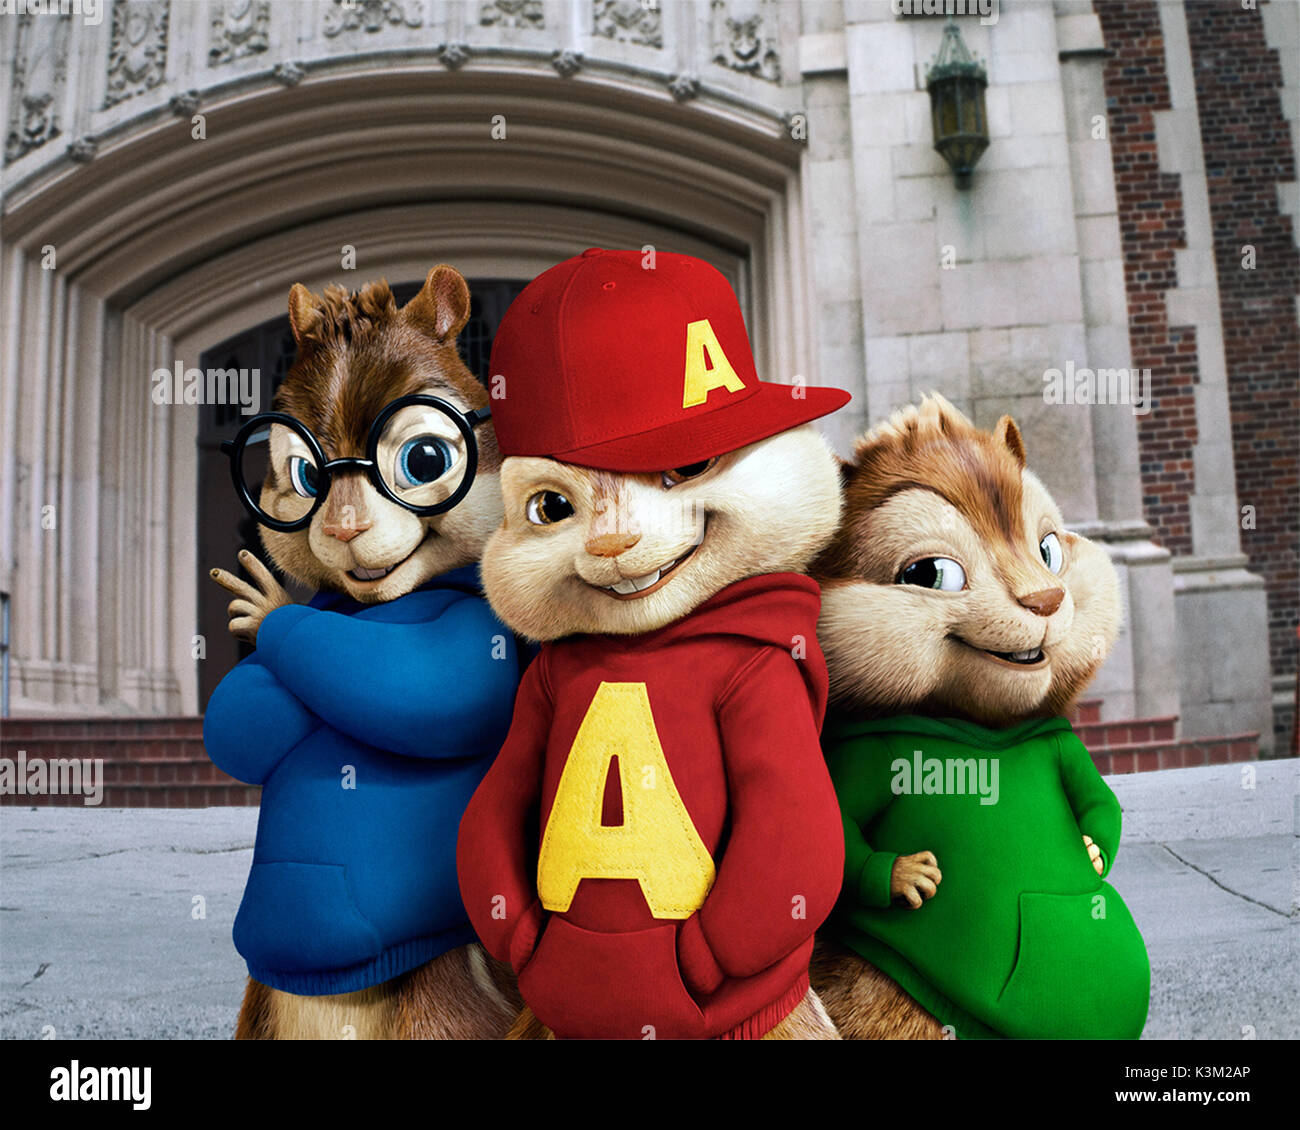 ALVIN AND THE CHIPMUNKS: THE SQUEAKUEL aka ALVIN AND THE CHIPMUNKS 2 MATTHEW GRAY GUBLER voices Simon, JUSTIN LONG voices Alvin, JESSE MCCARTNEY voices Theodore        Date: 2009 Stock Photo